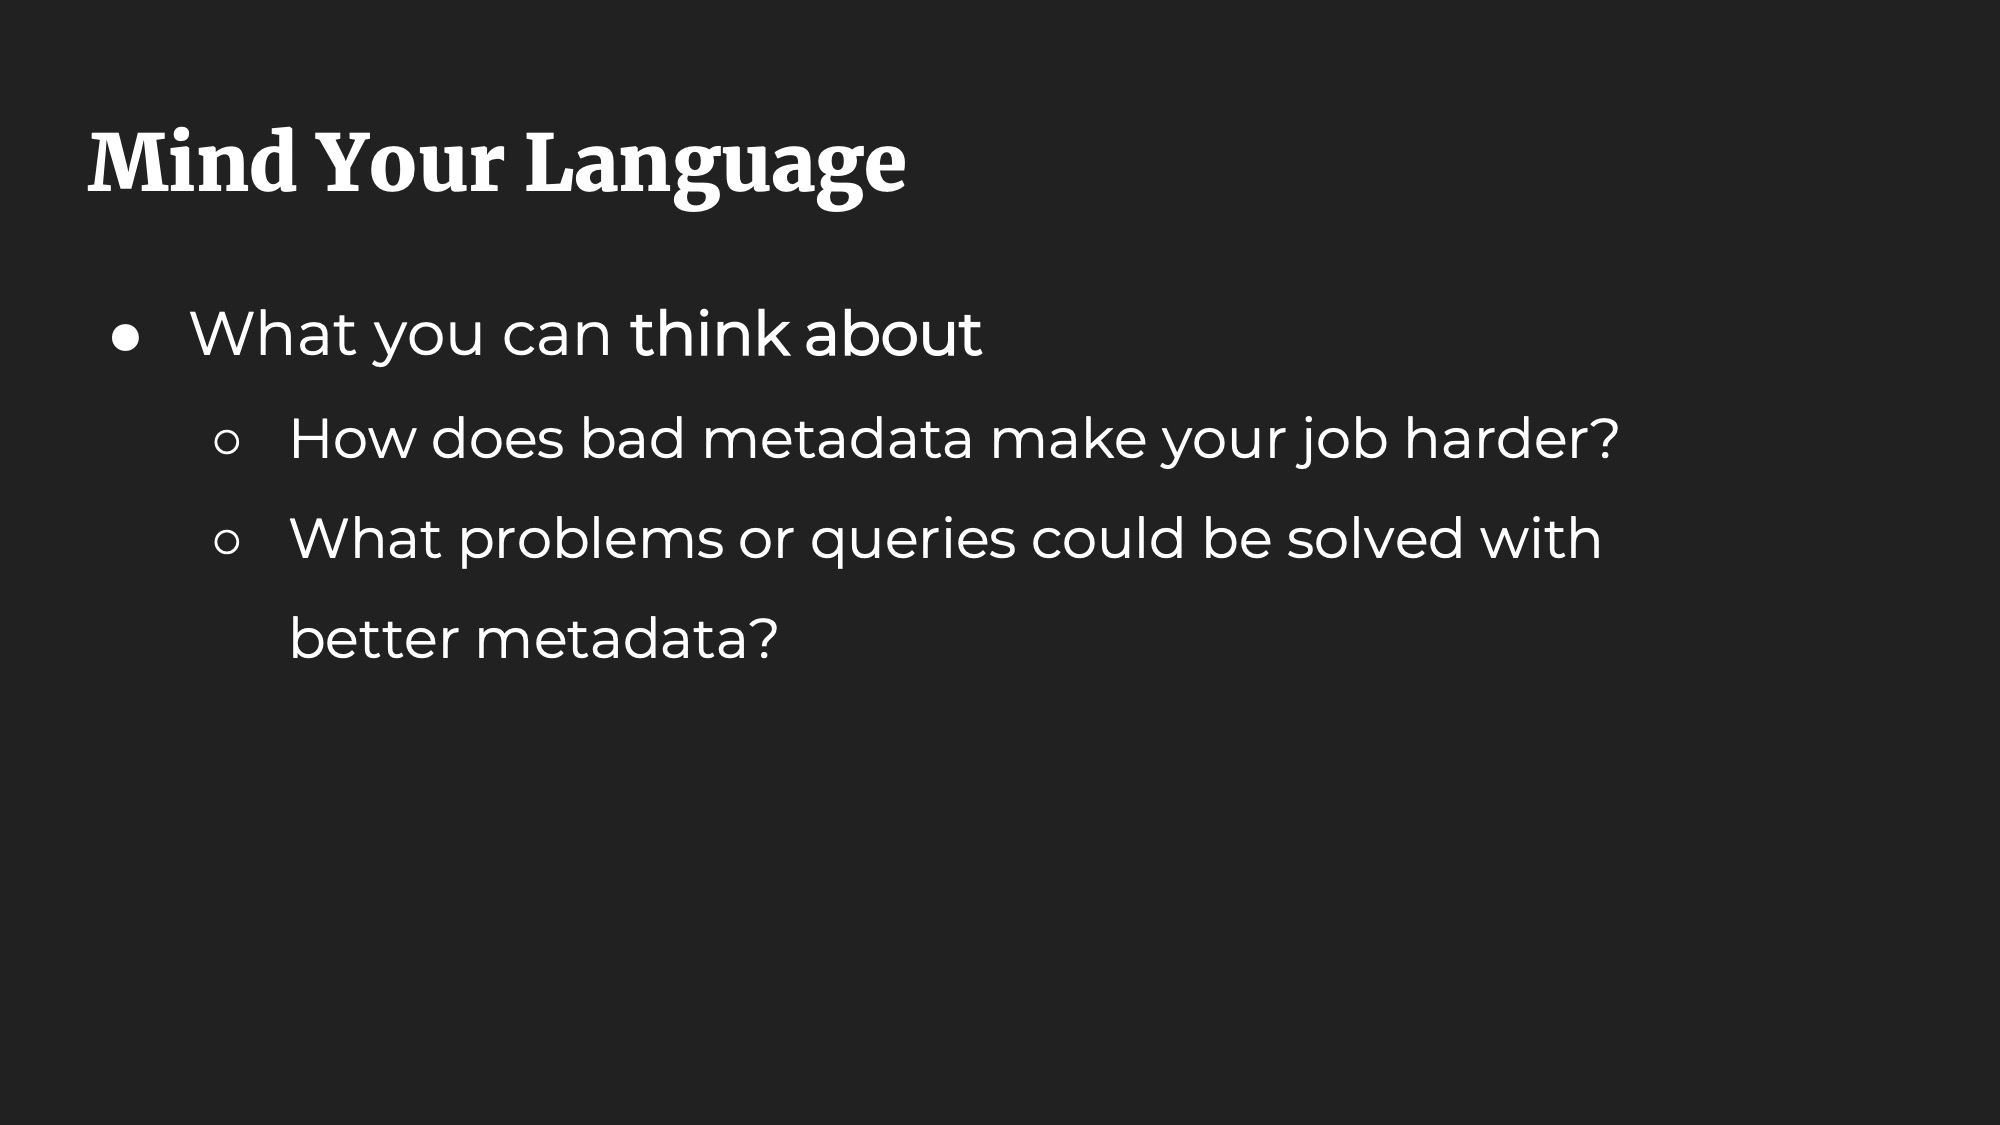 Mind Your Language. What you can think about: How does bad metadata make your job harder? What problems or queries could be solved with better metadata?